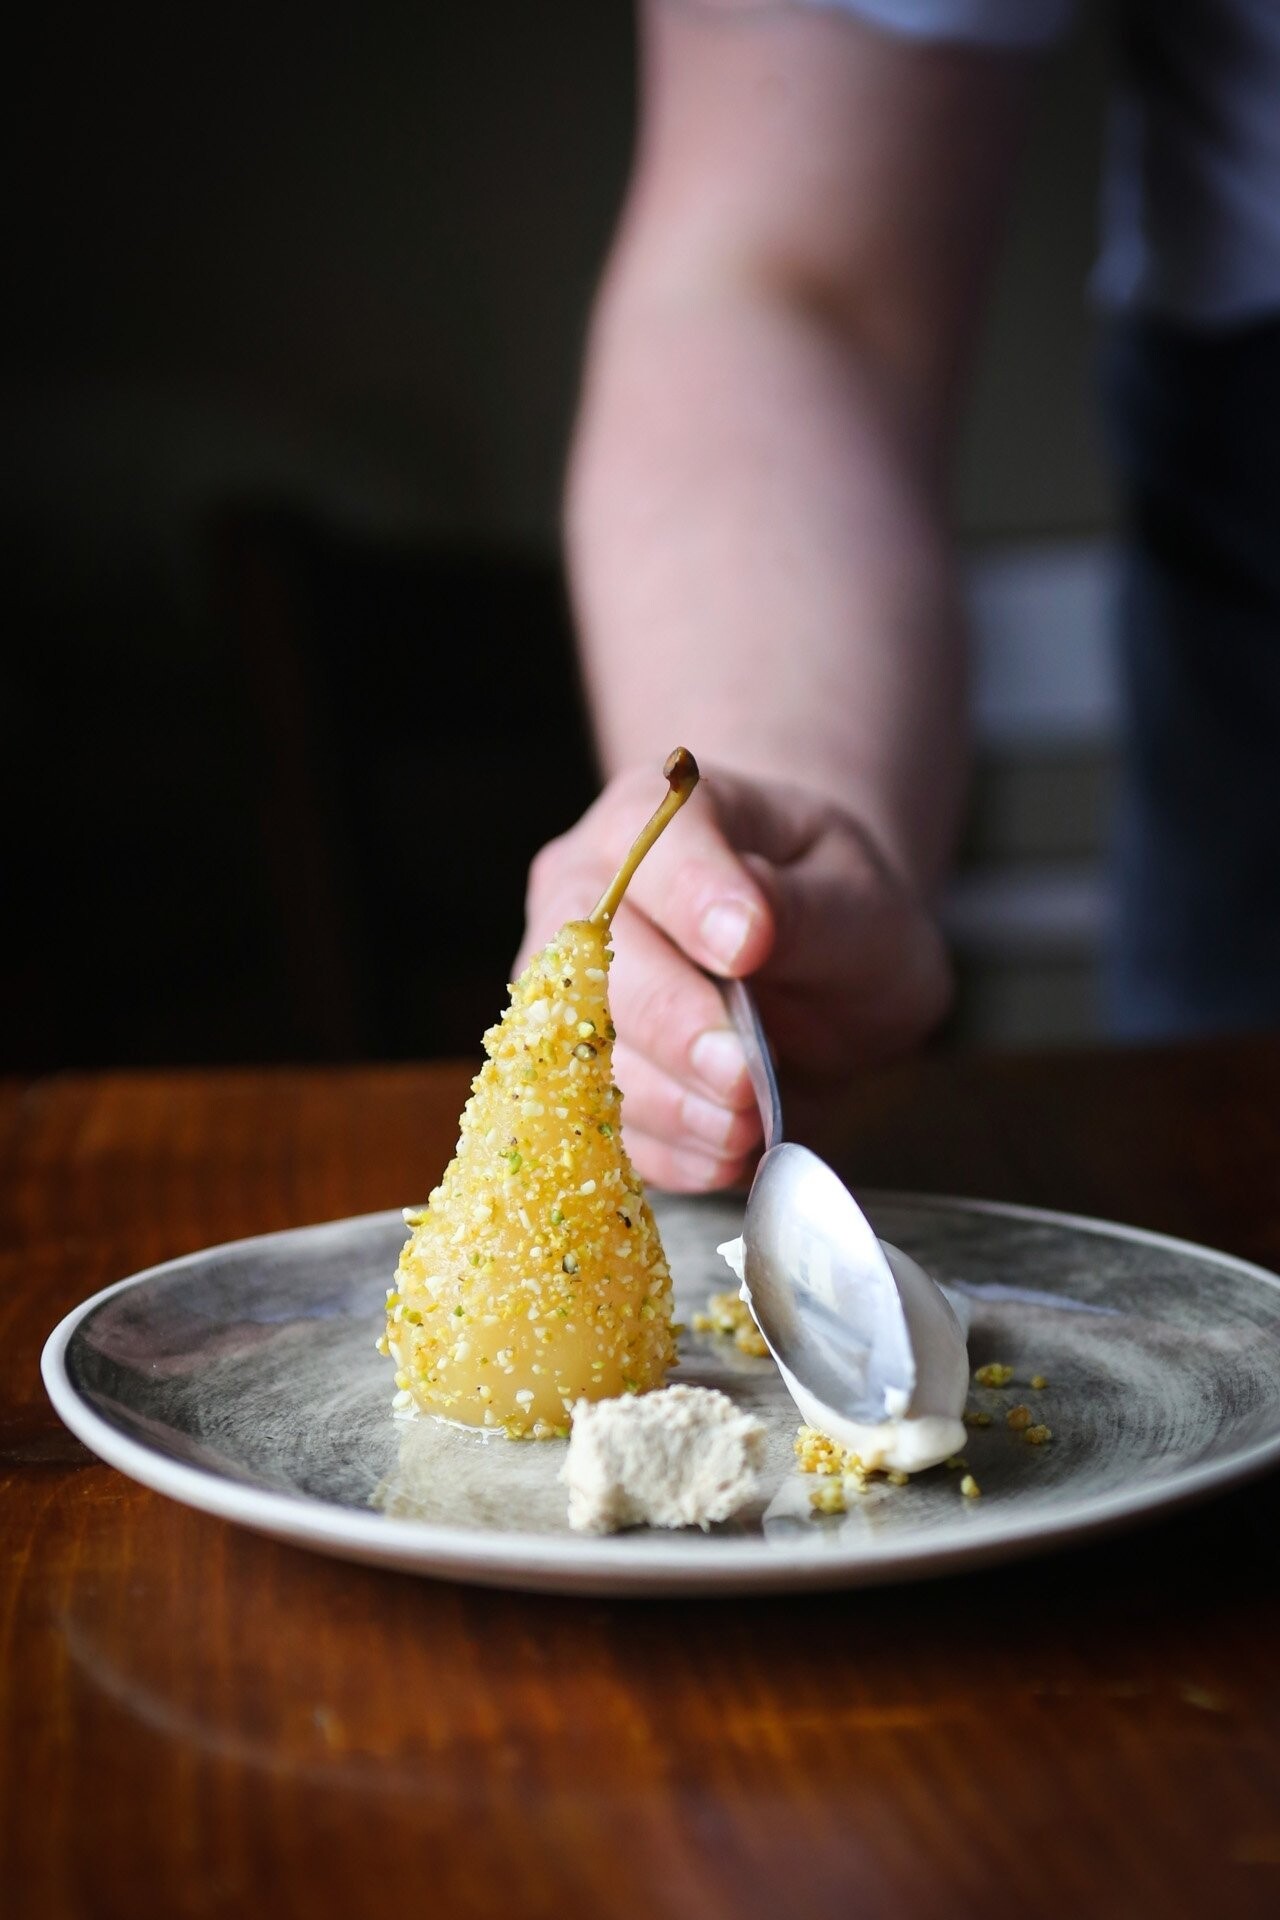 I work with natural light and a documentary approach to all my food photography, so this image was captured in realtime, as Chef Joshua Overington plated his dessert for our photoshoot. His stunning creation is poached pear in a nougatine crust, faisselle normande and Corsican chestnut honey ice cream, for Le Cochon Aveugle in York, UK.  It was delicious!